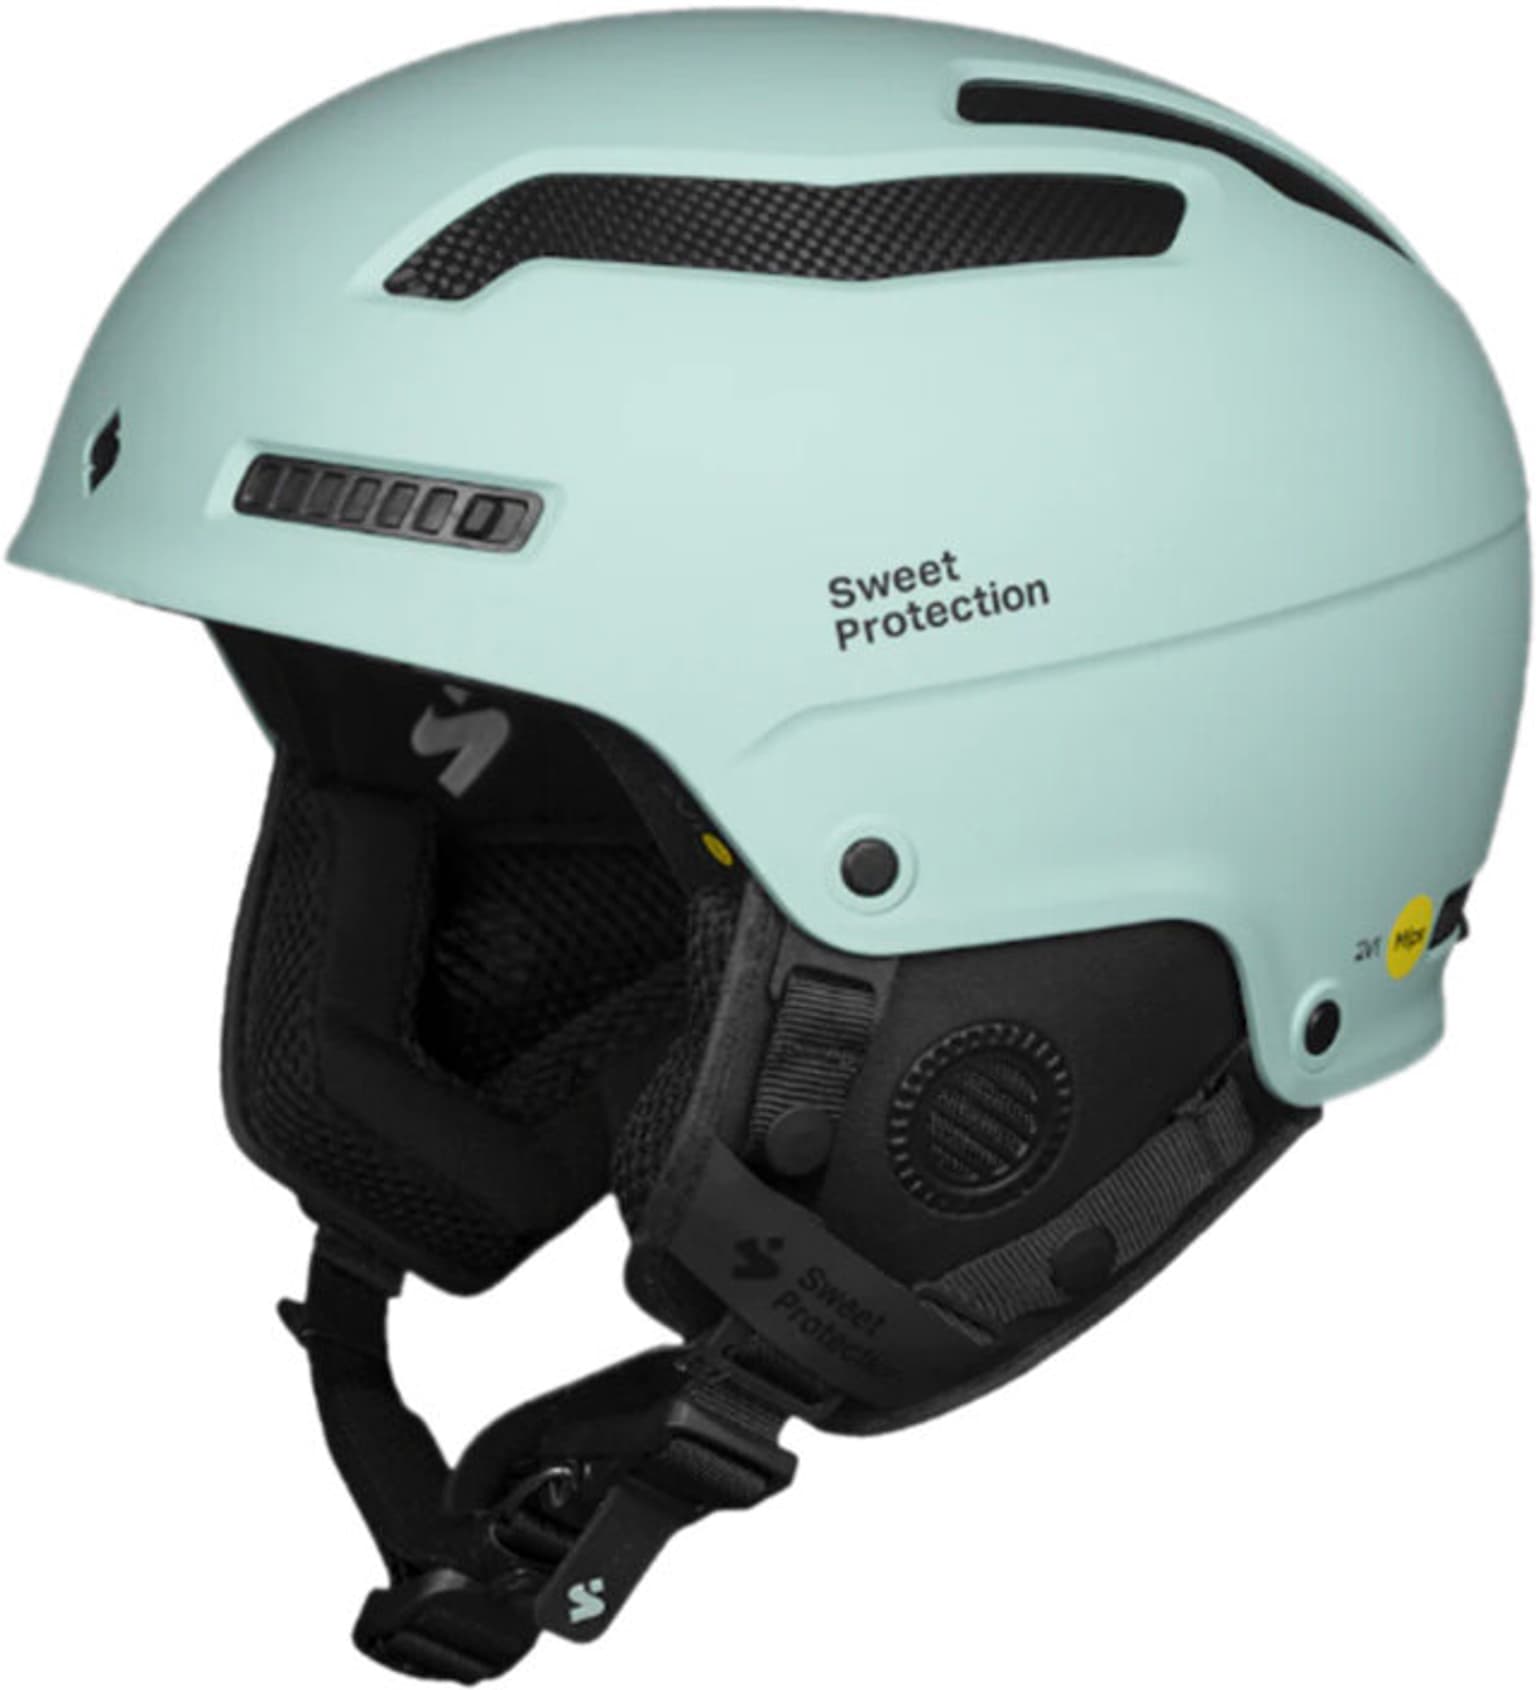 Sweet Protection Sweet Protection Trooper 2Vi Mips Casque de ski menthe 1